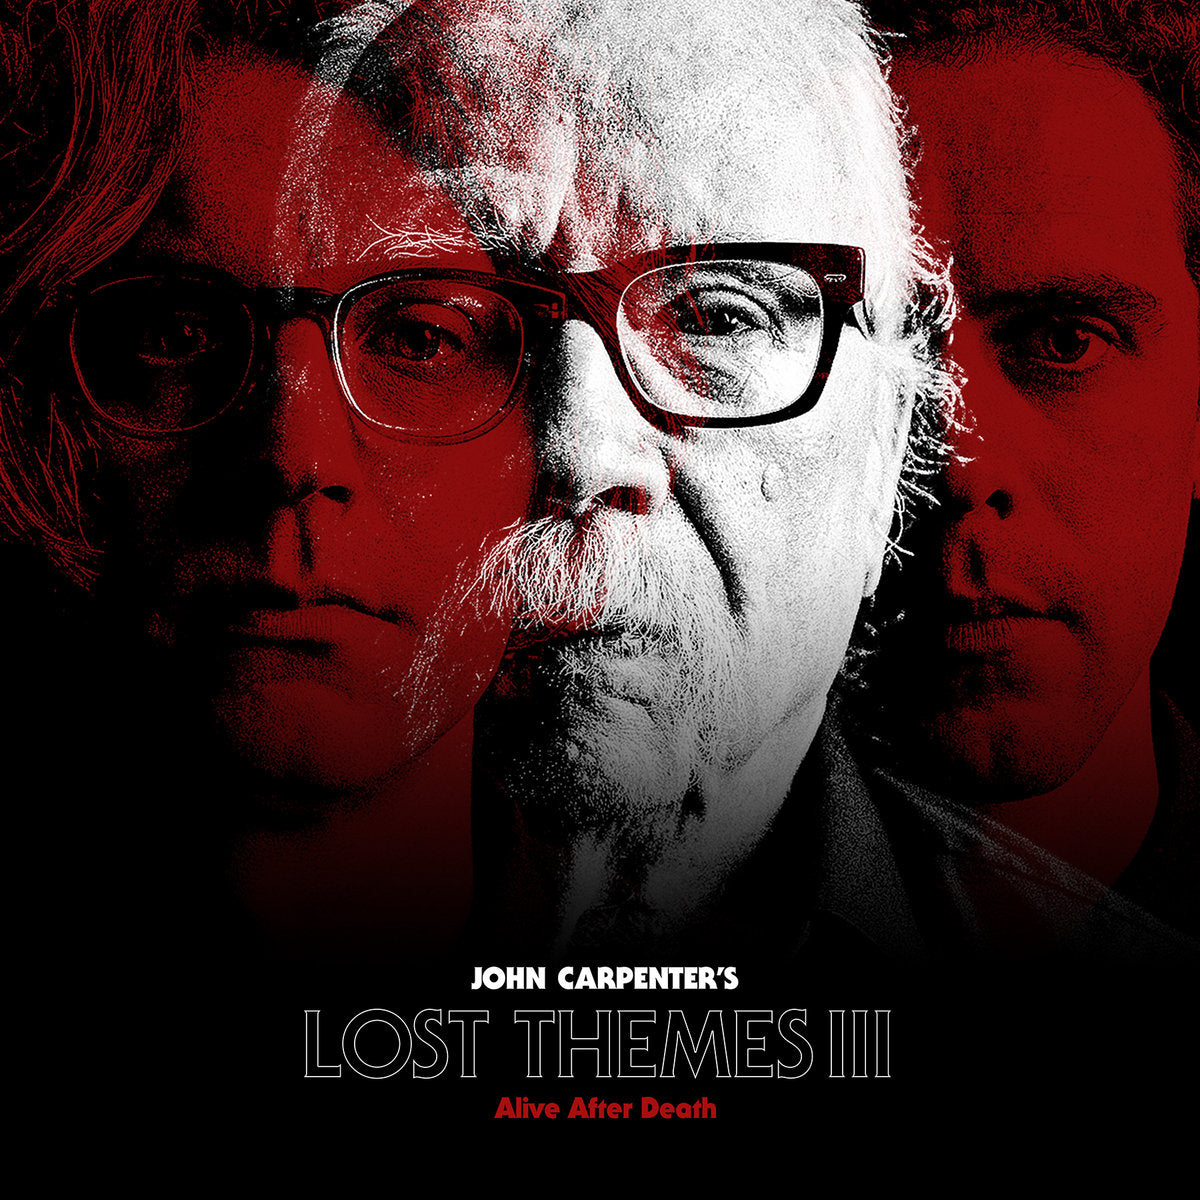 JOHN CARPENTER "Lost Themes III (Alive After Death)" LP